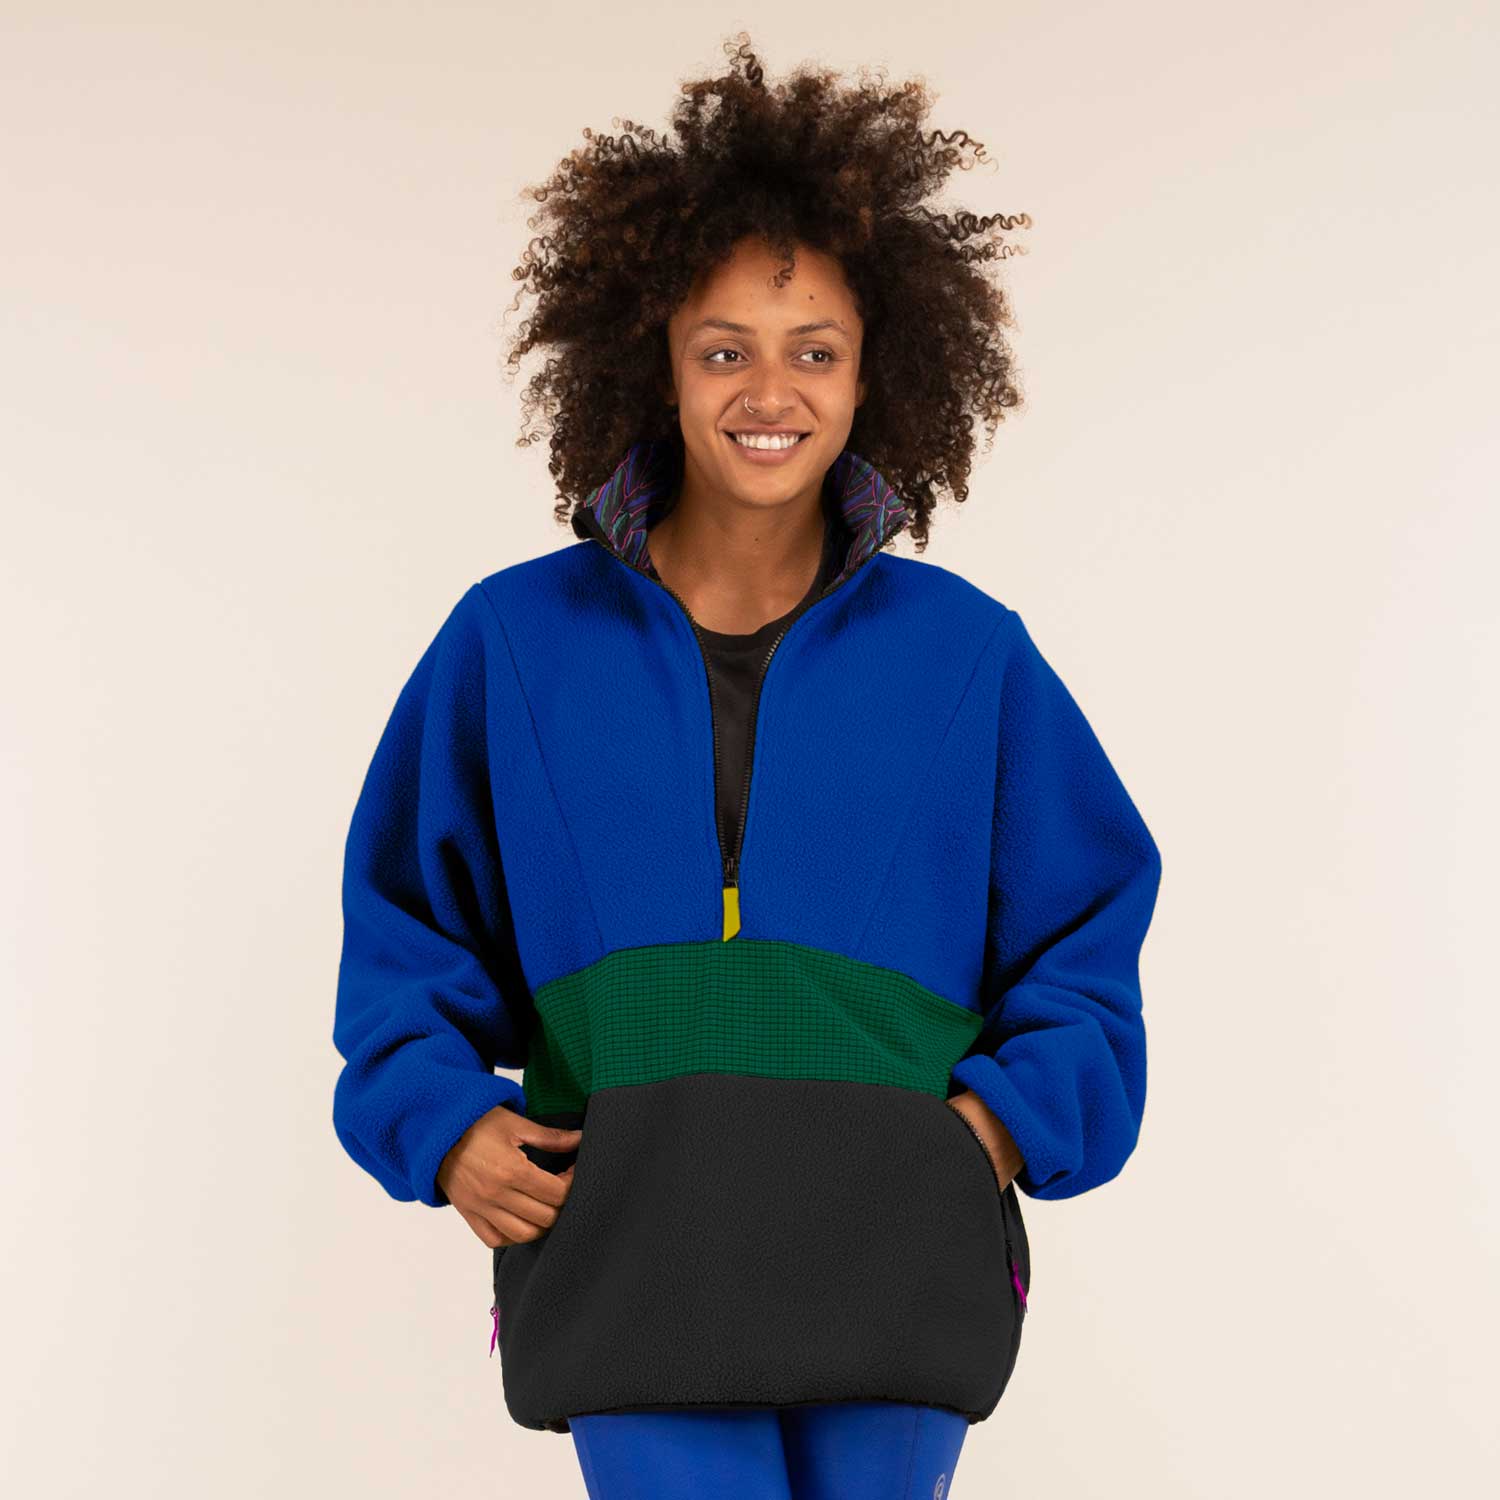 ALEX | Unisex Half Zip Fleece | 3RD ROCK Clothing -  Kendal is 5ft 7" with a 36" chest, 28" waist, 38" hips measuring S-M on the size chart. Here she wears a size L for a more oversized fit.  F